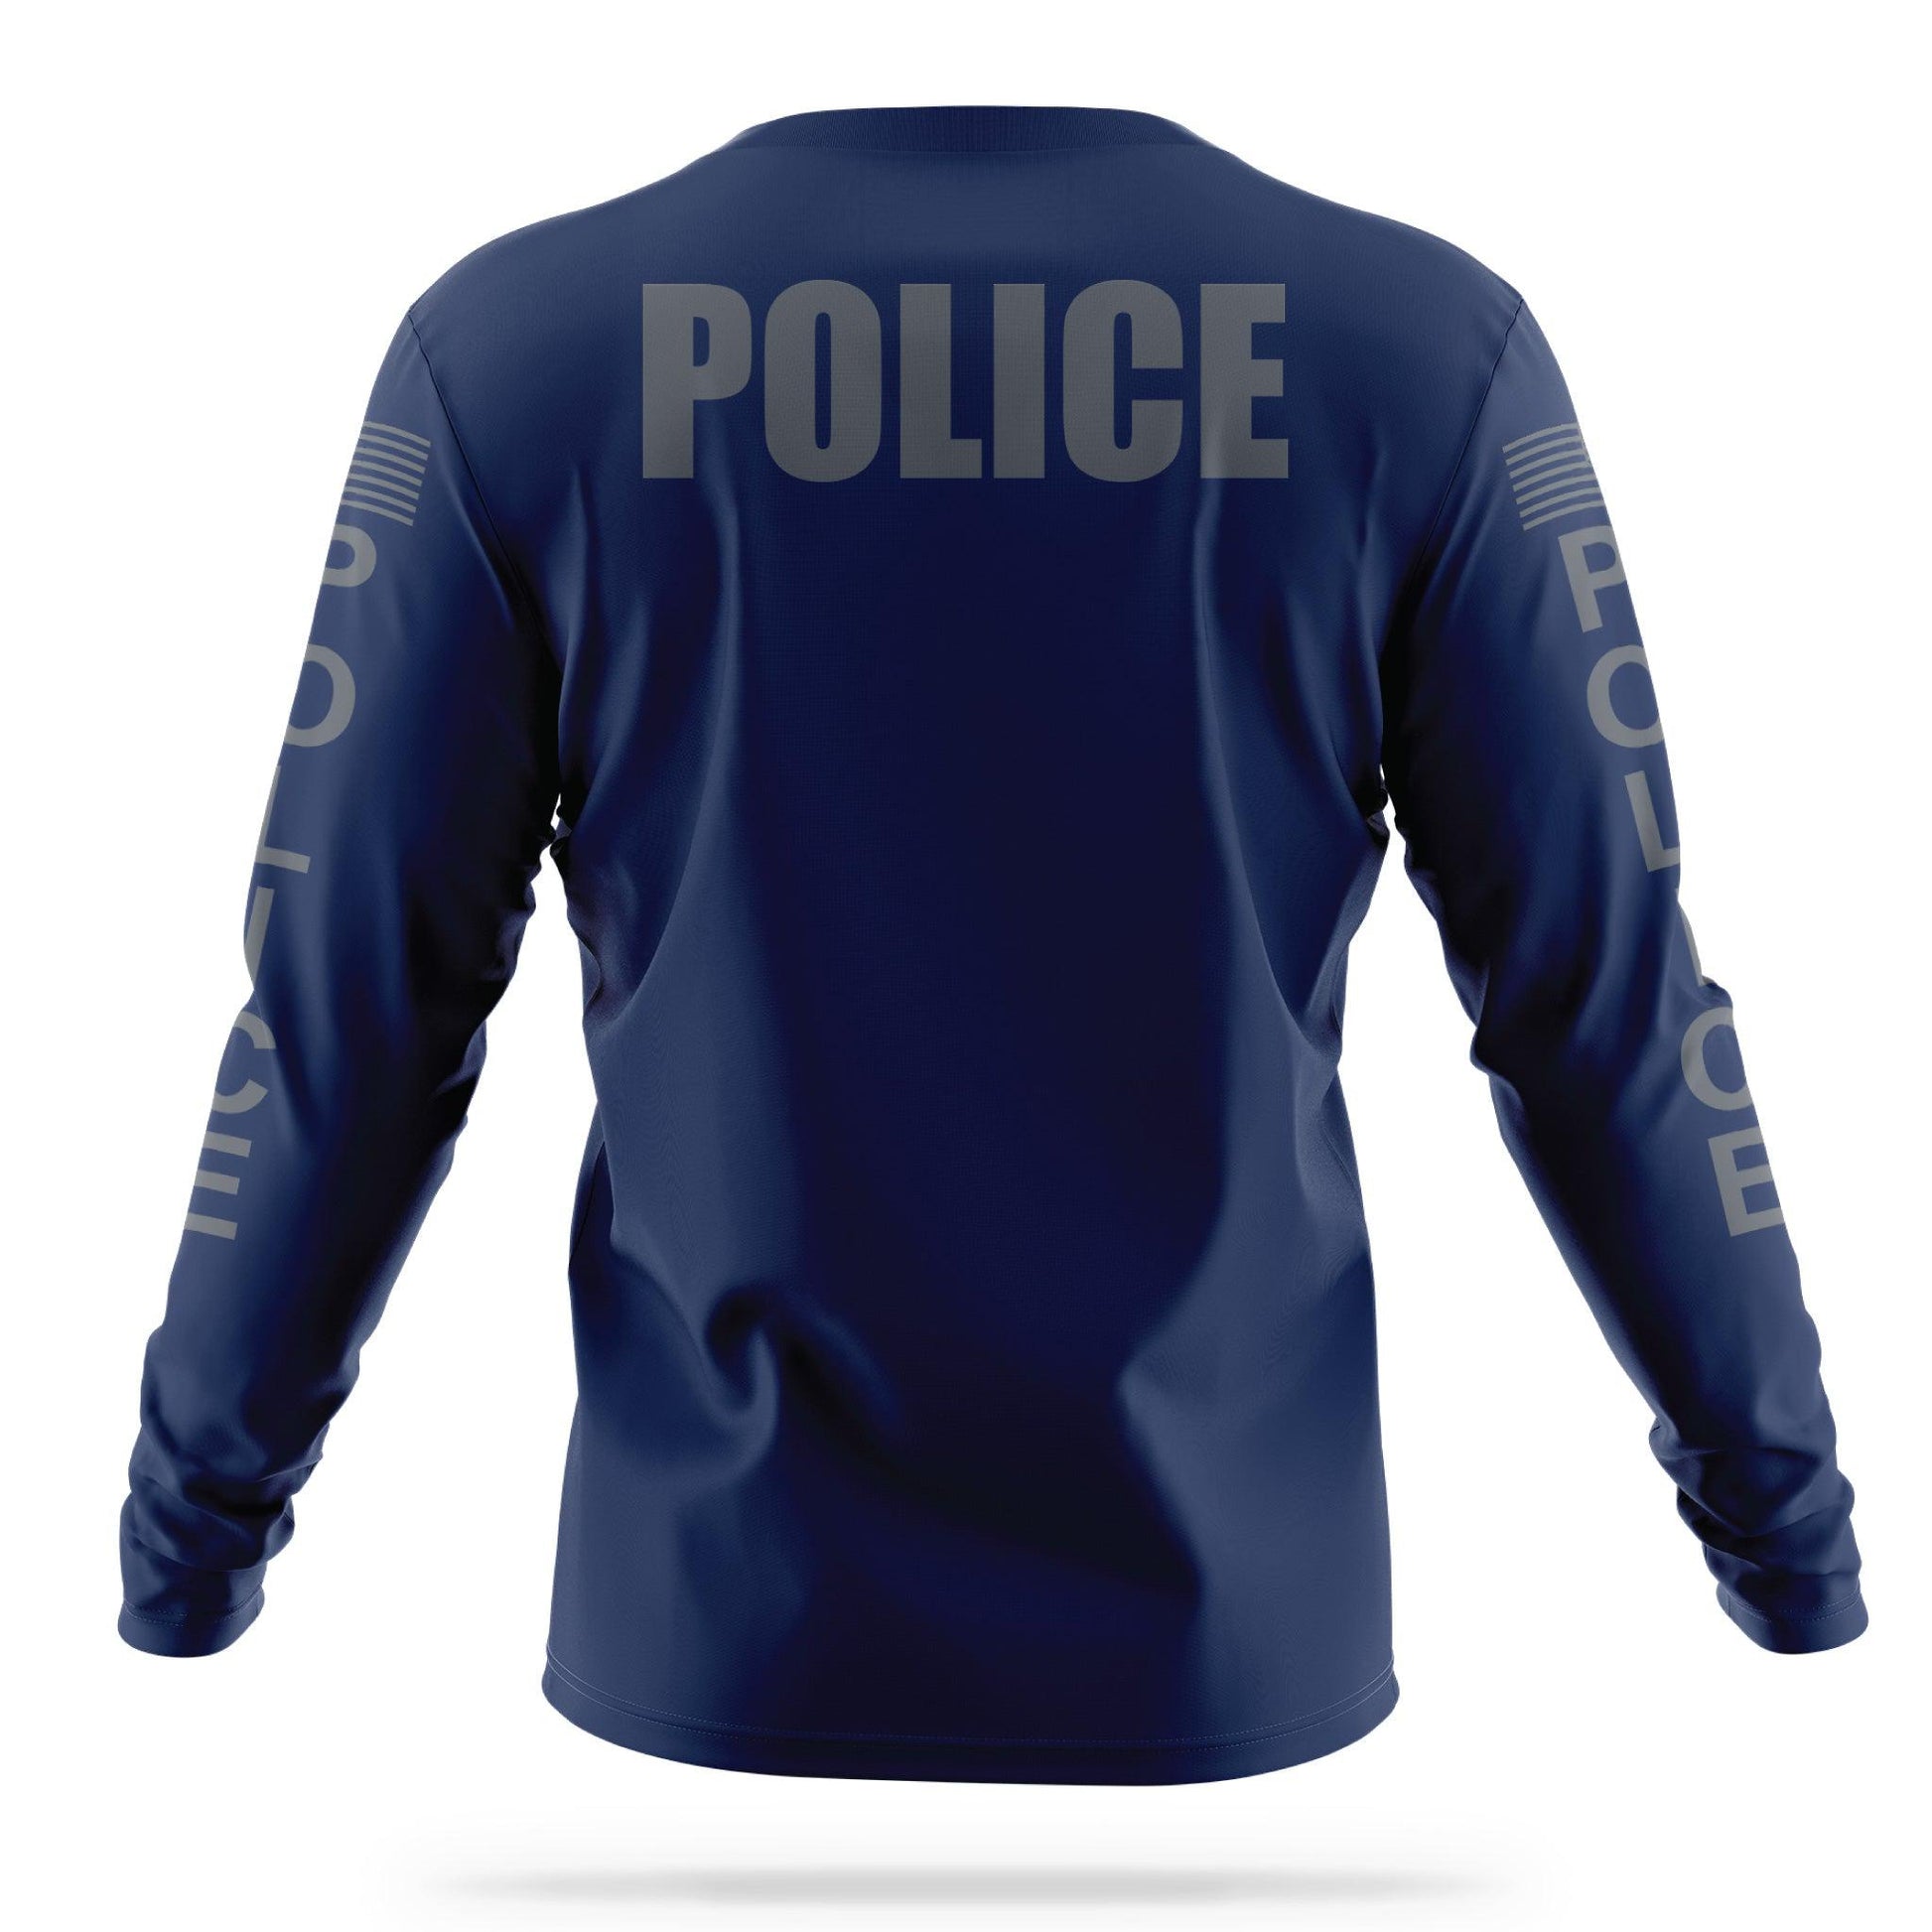 [POLICE] Men's Utility Long Sleeve [NVY/GRY]-13 Fifty Apparel